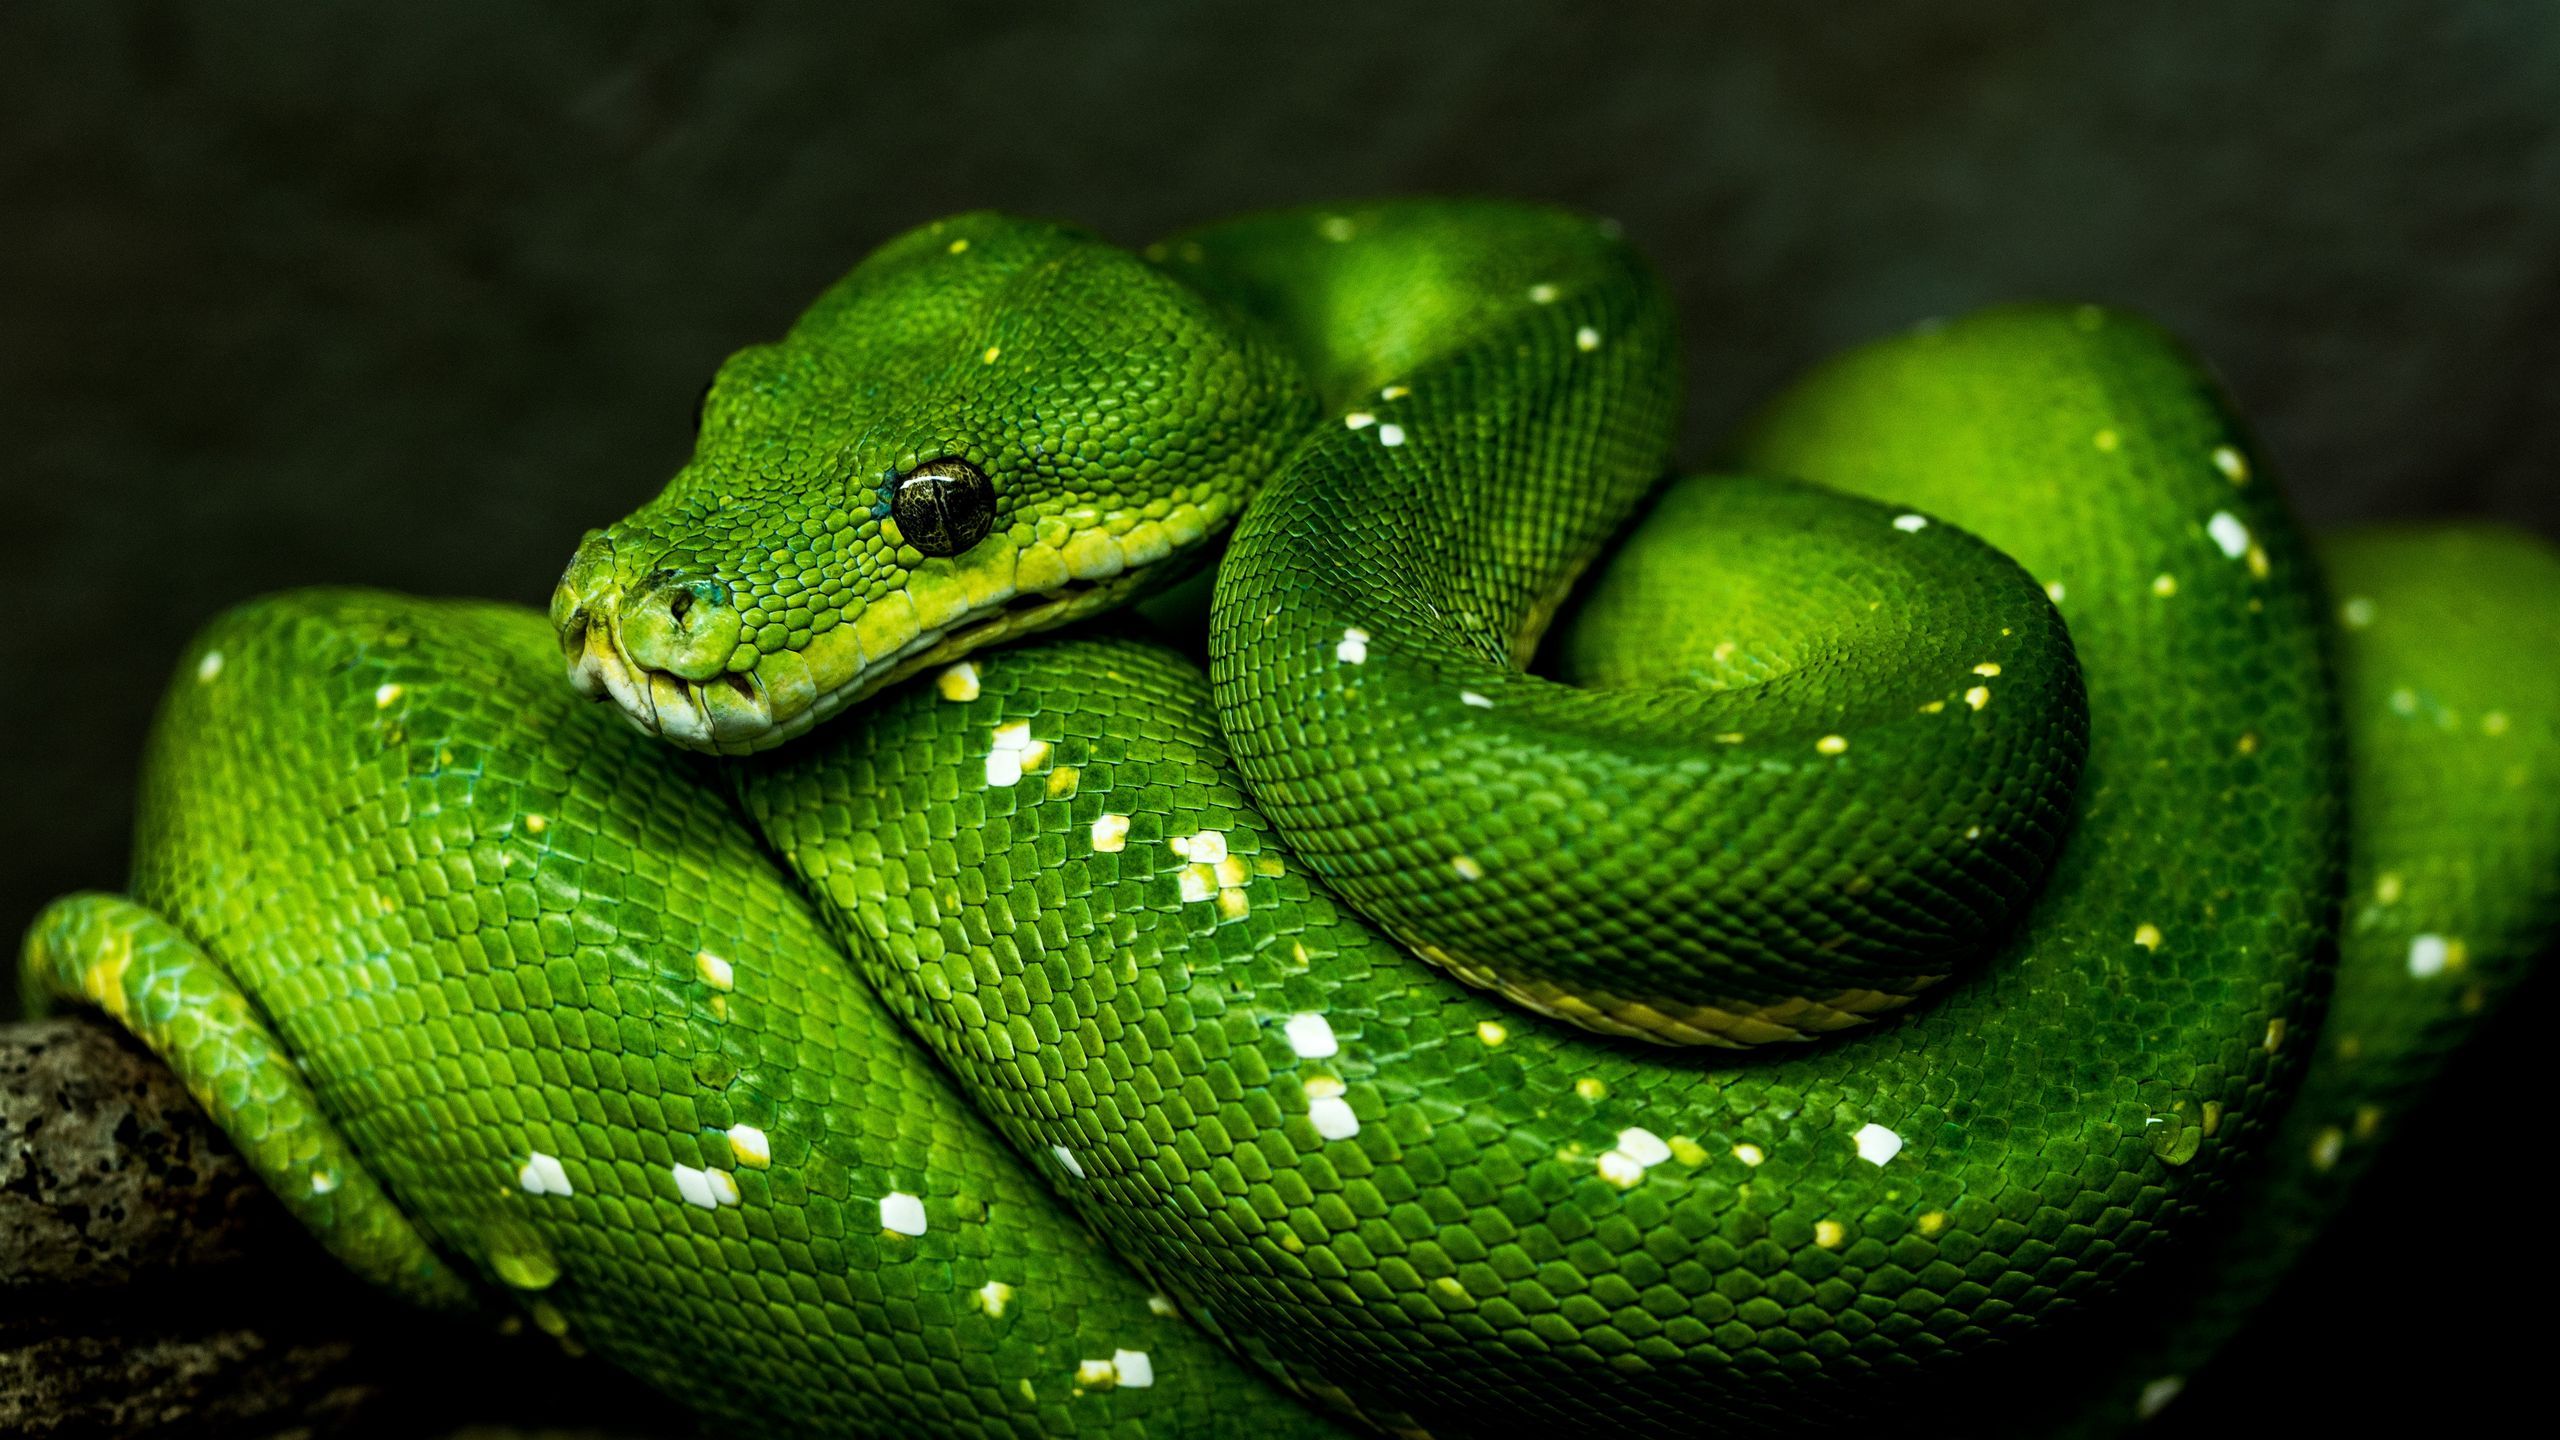 Download wallpaper 2560x1440 snake, green, reptile, wildlife widescreen 16:9 HD background